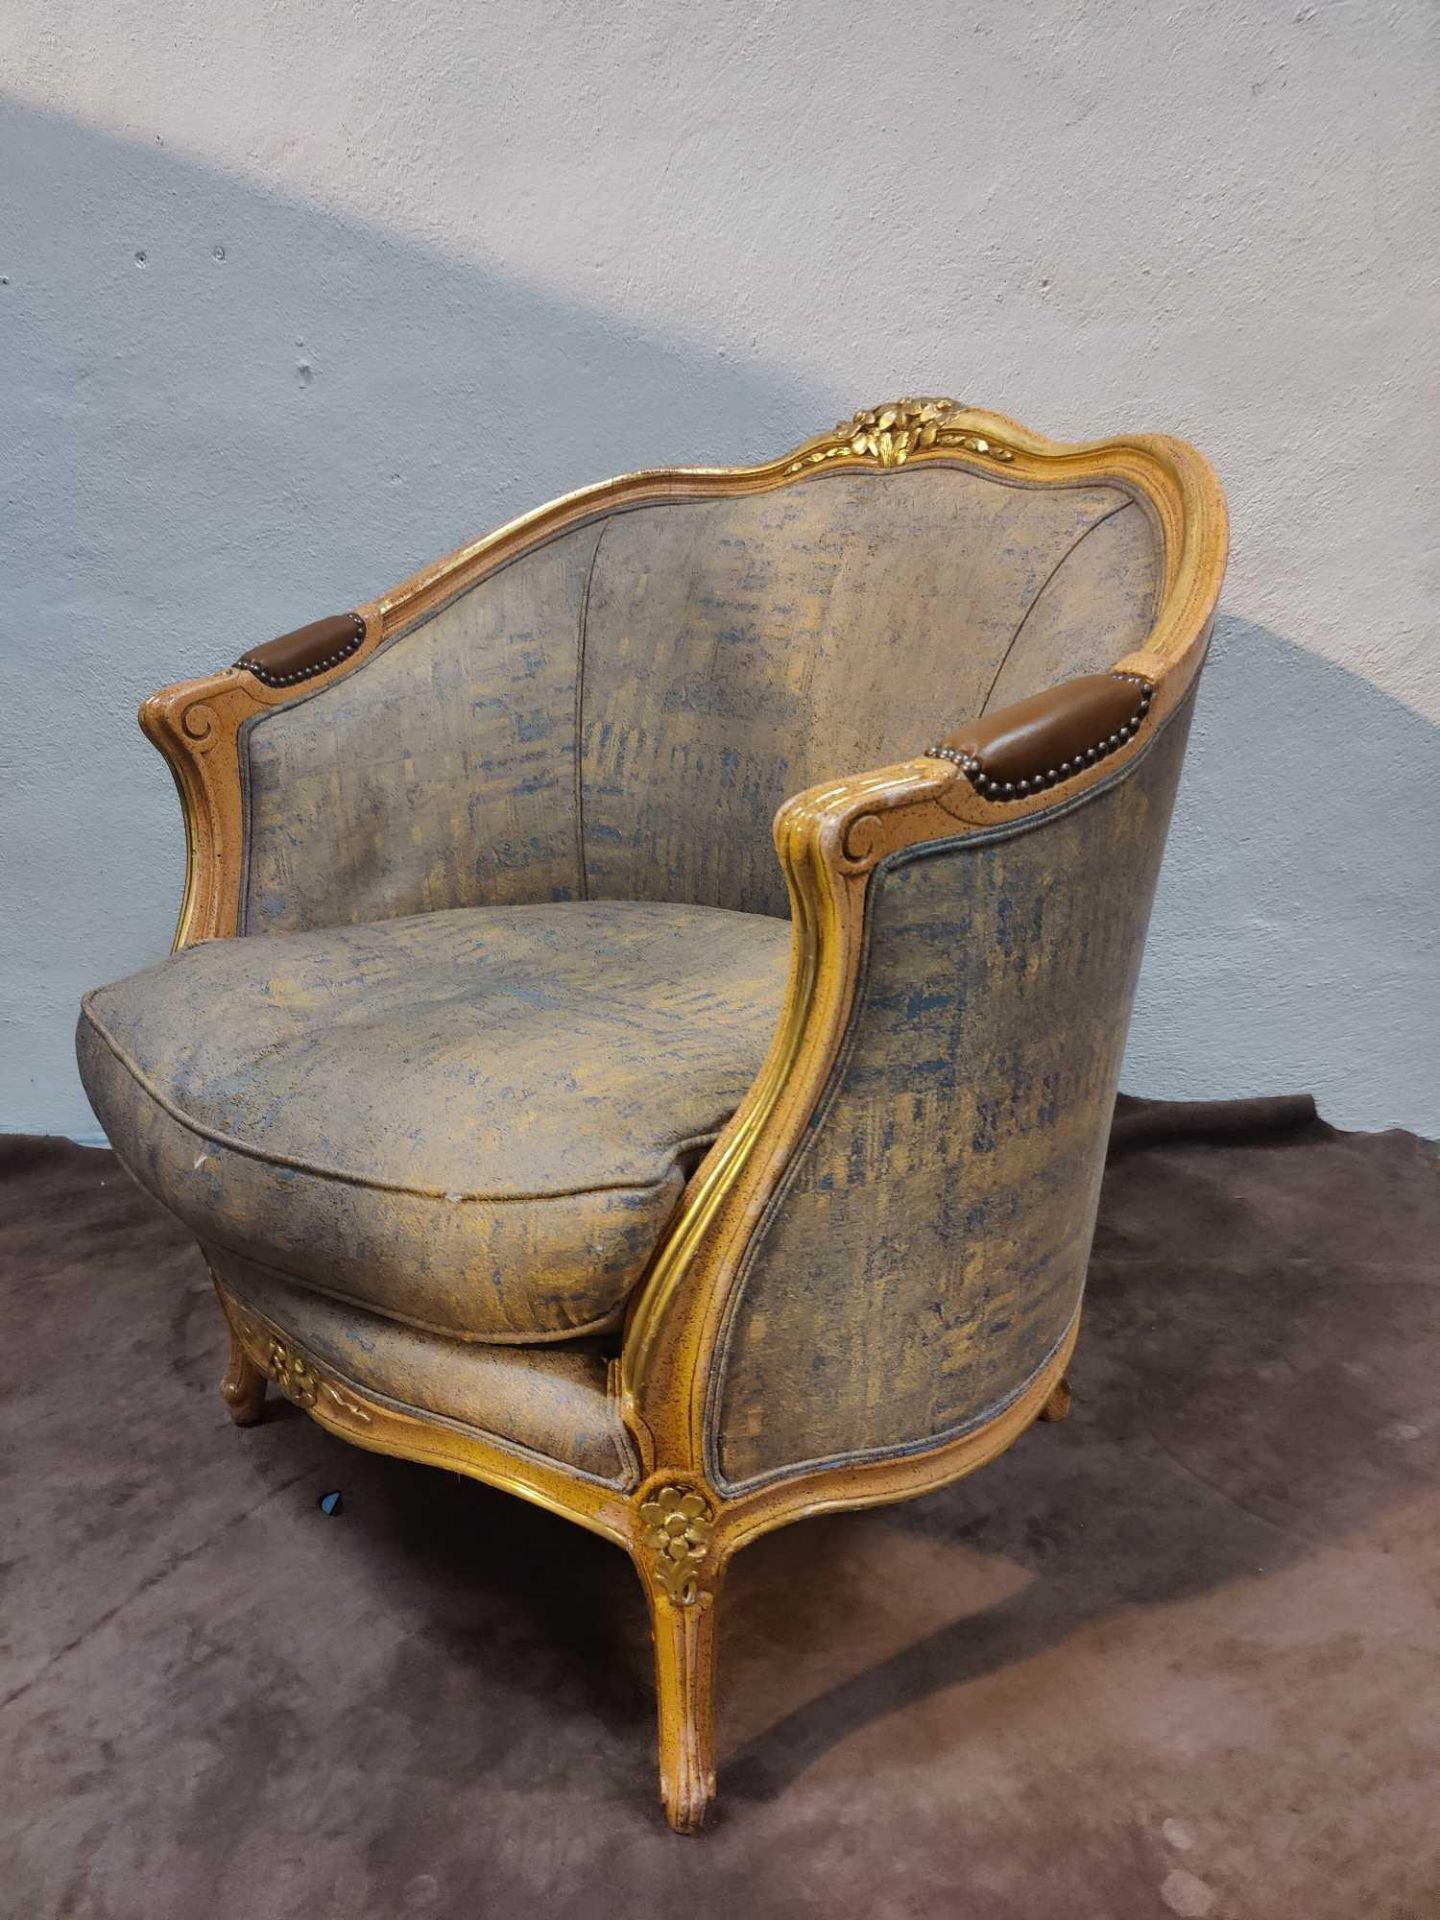 A Giltwood Framed Upholstered Bergere Chair With Carved Decorative Ornamentation To The Back Rail